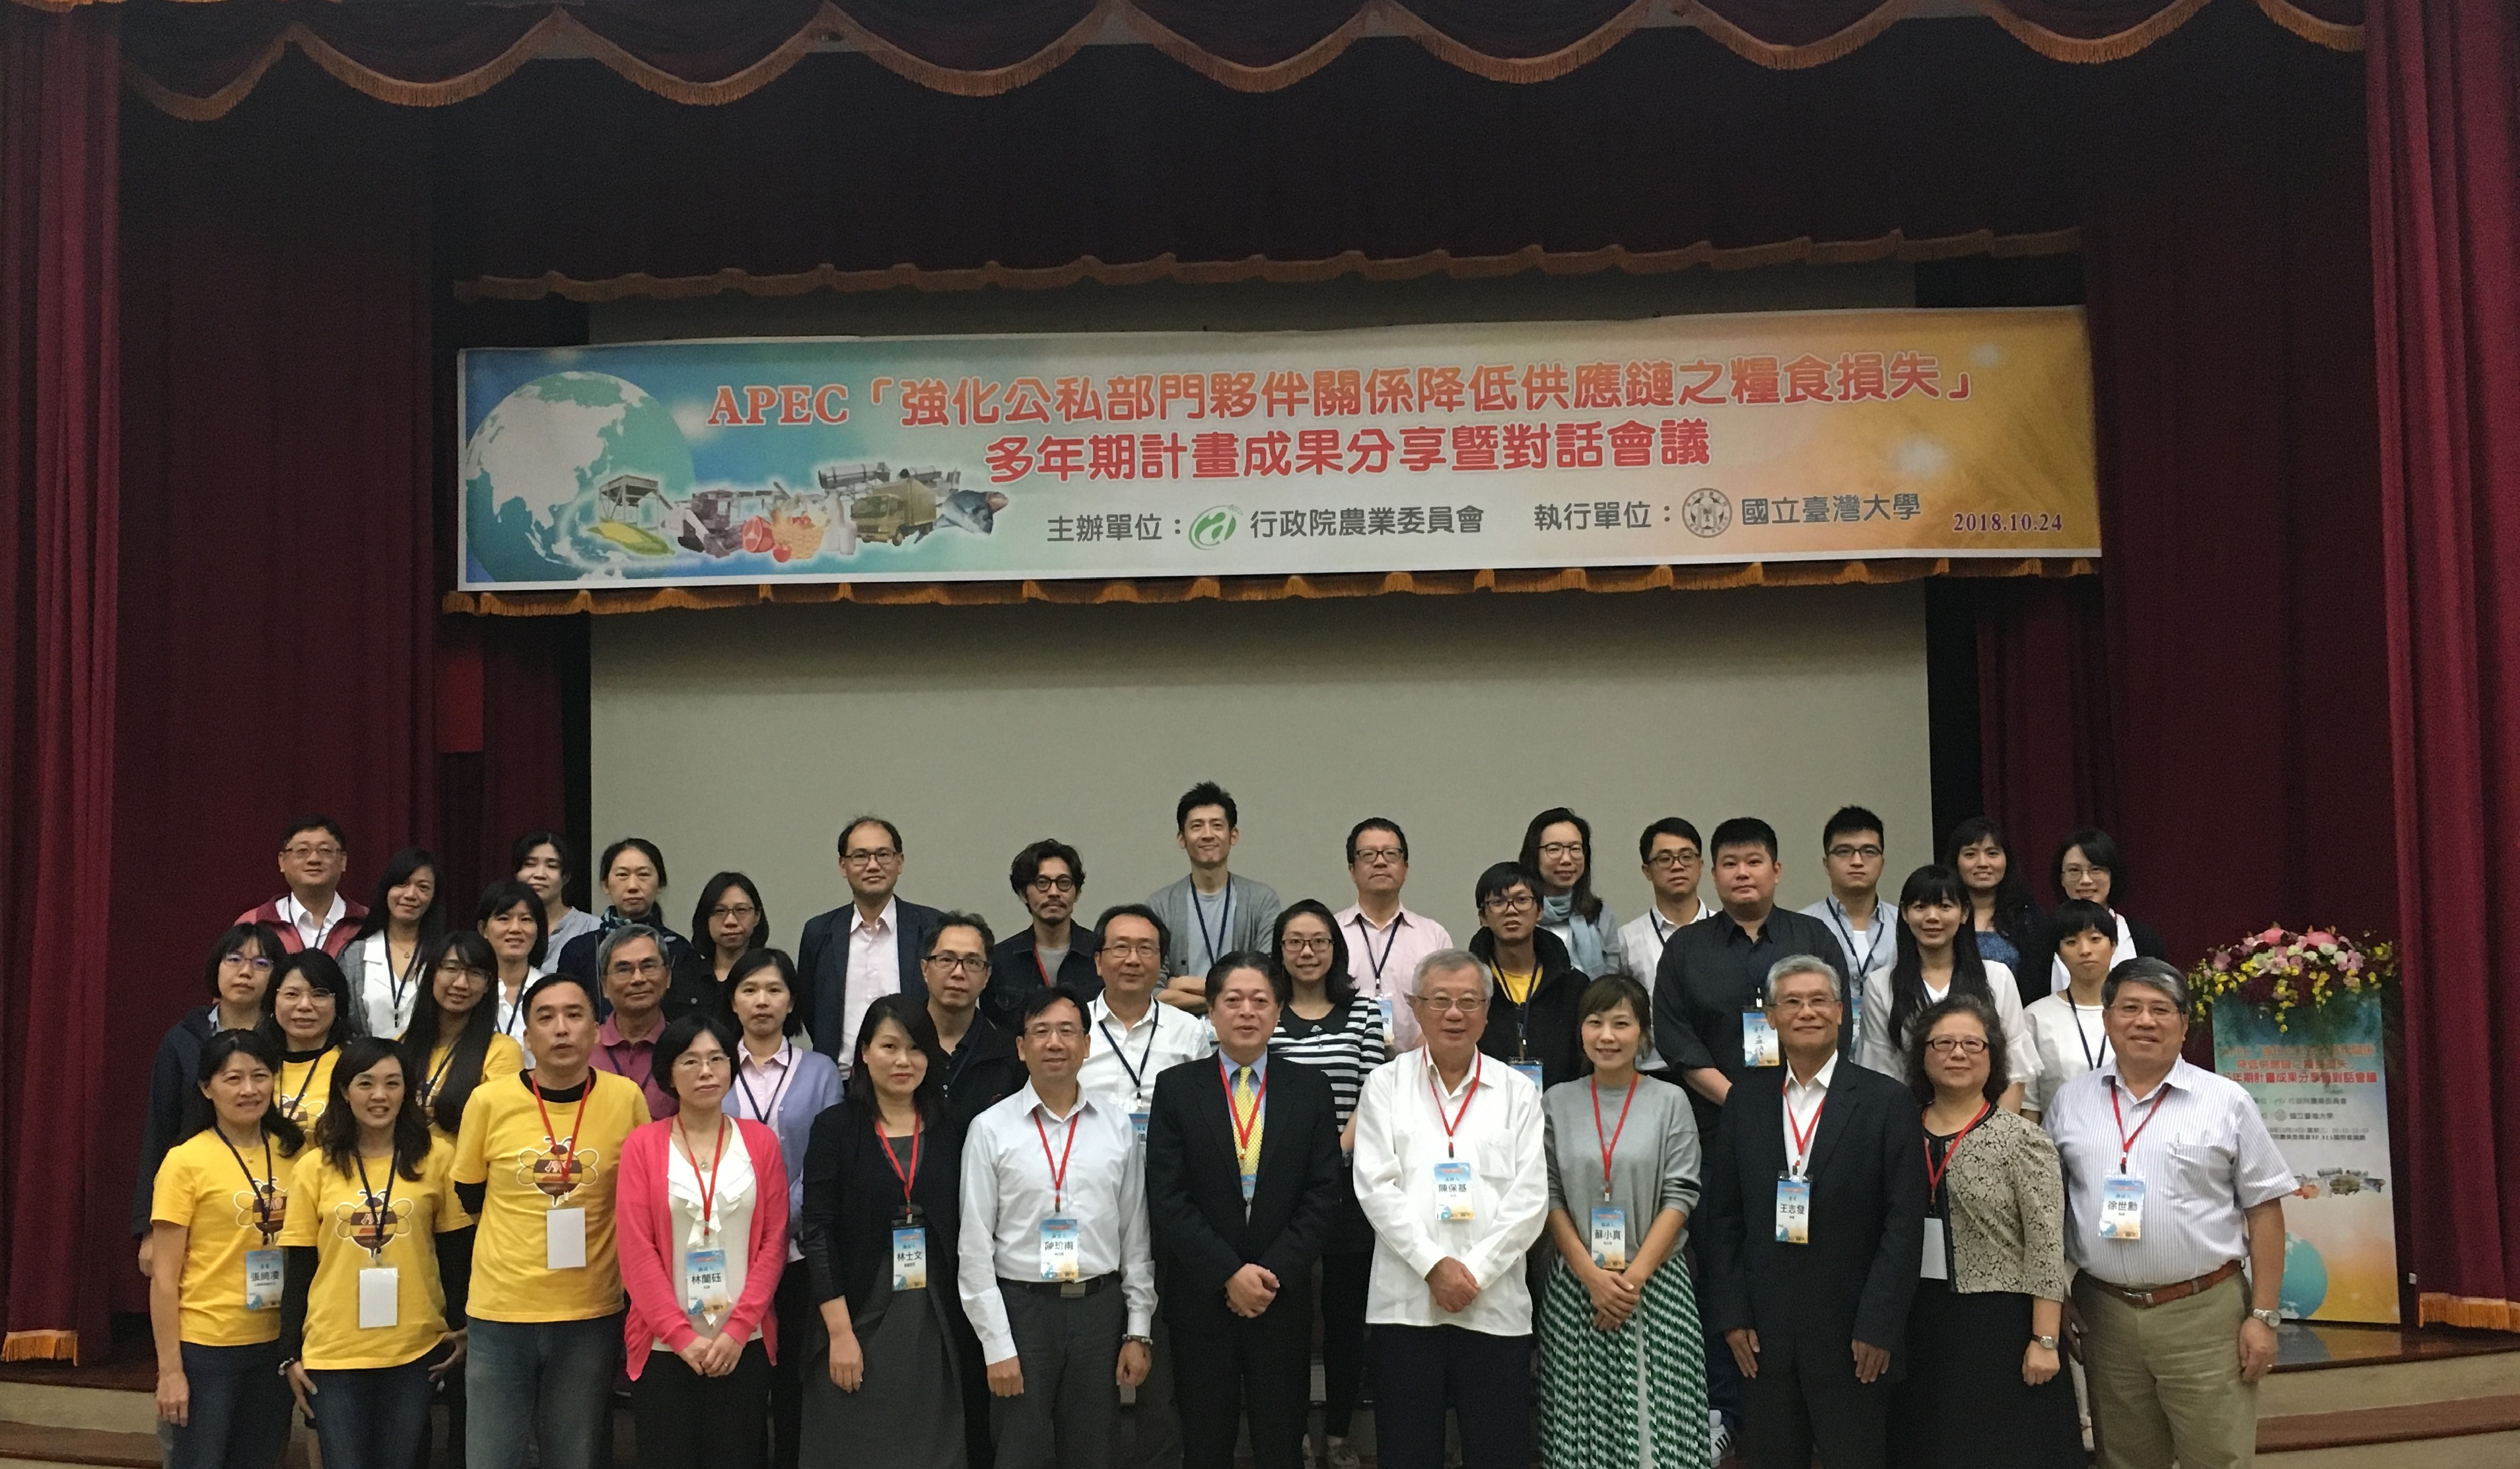 APEC Multi-Year Project Workshop on Strengthening Public-Private Partnership to Reduce Food Losses in the Supply Chain